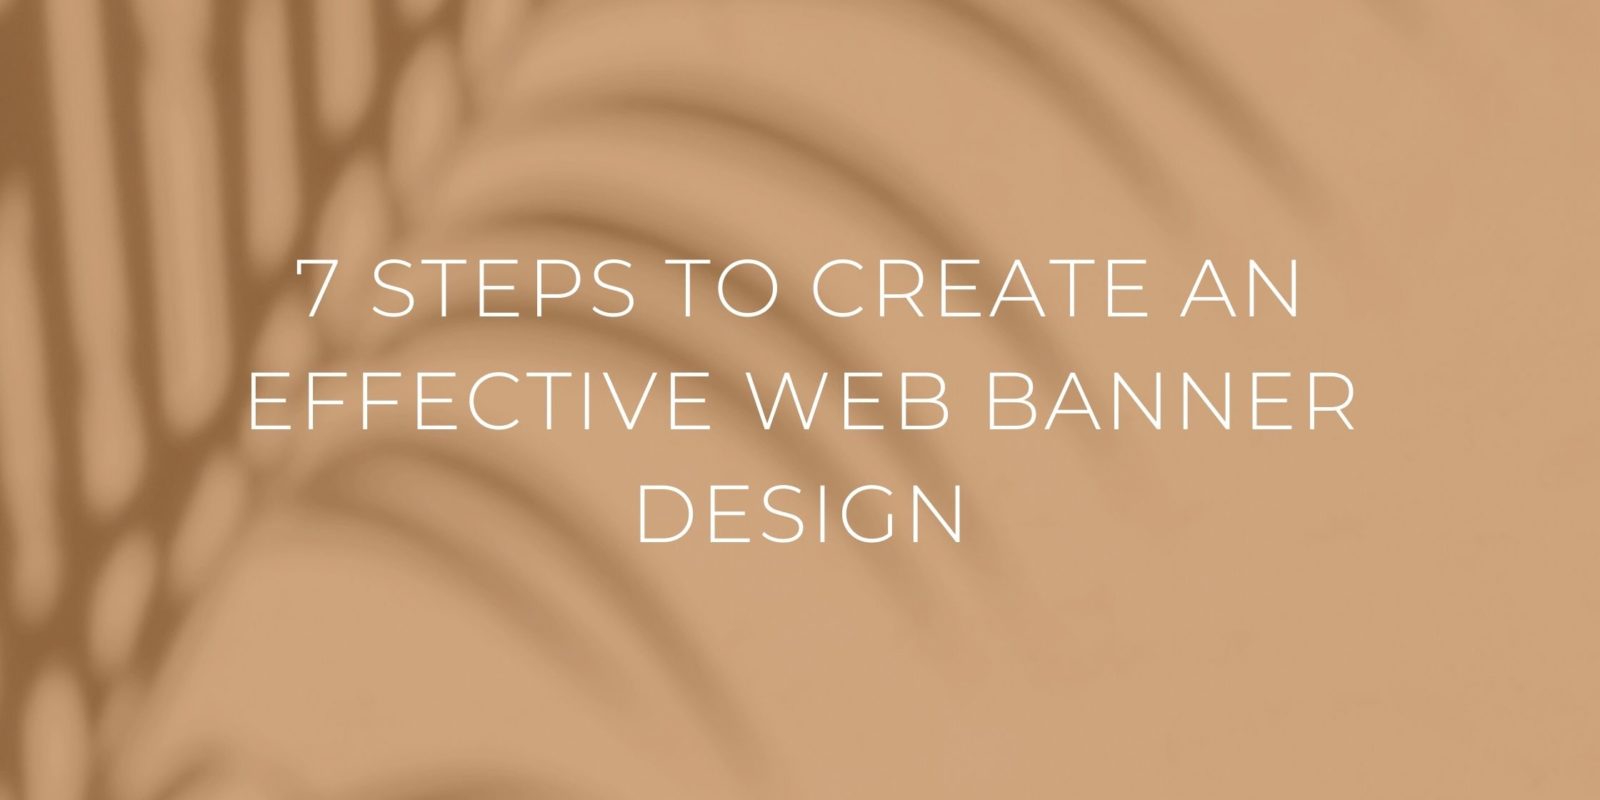 7 Steps to Create an Effective Web Banner Design